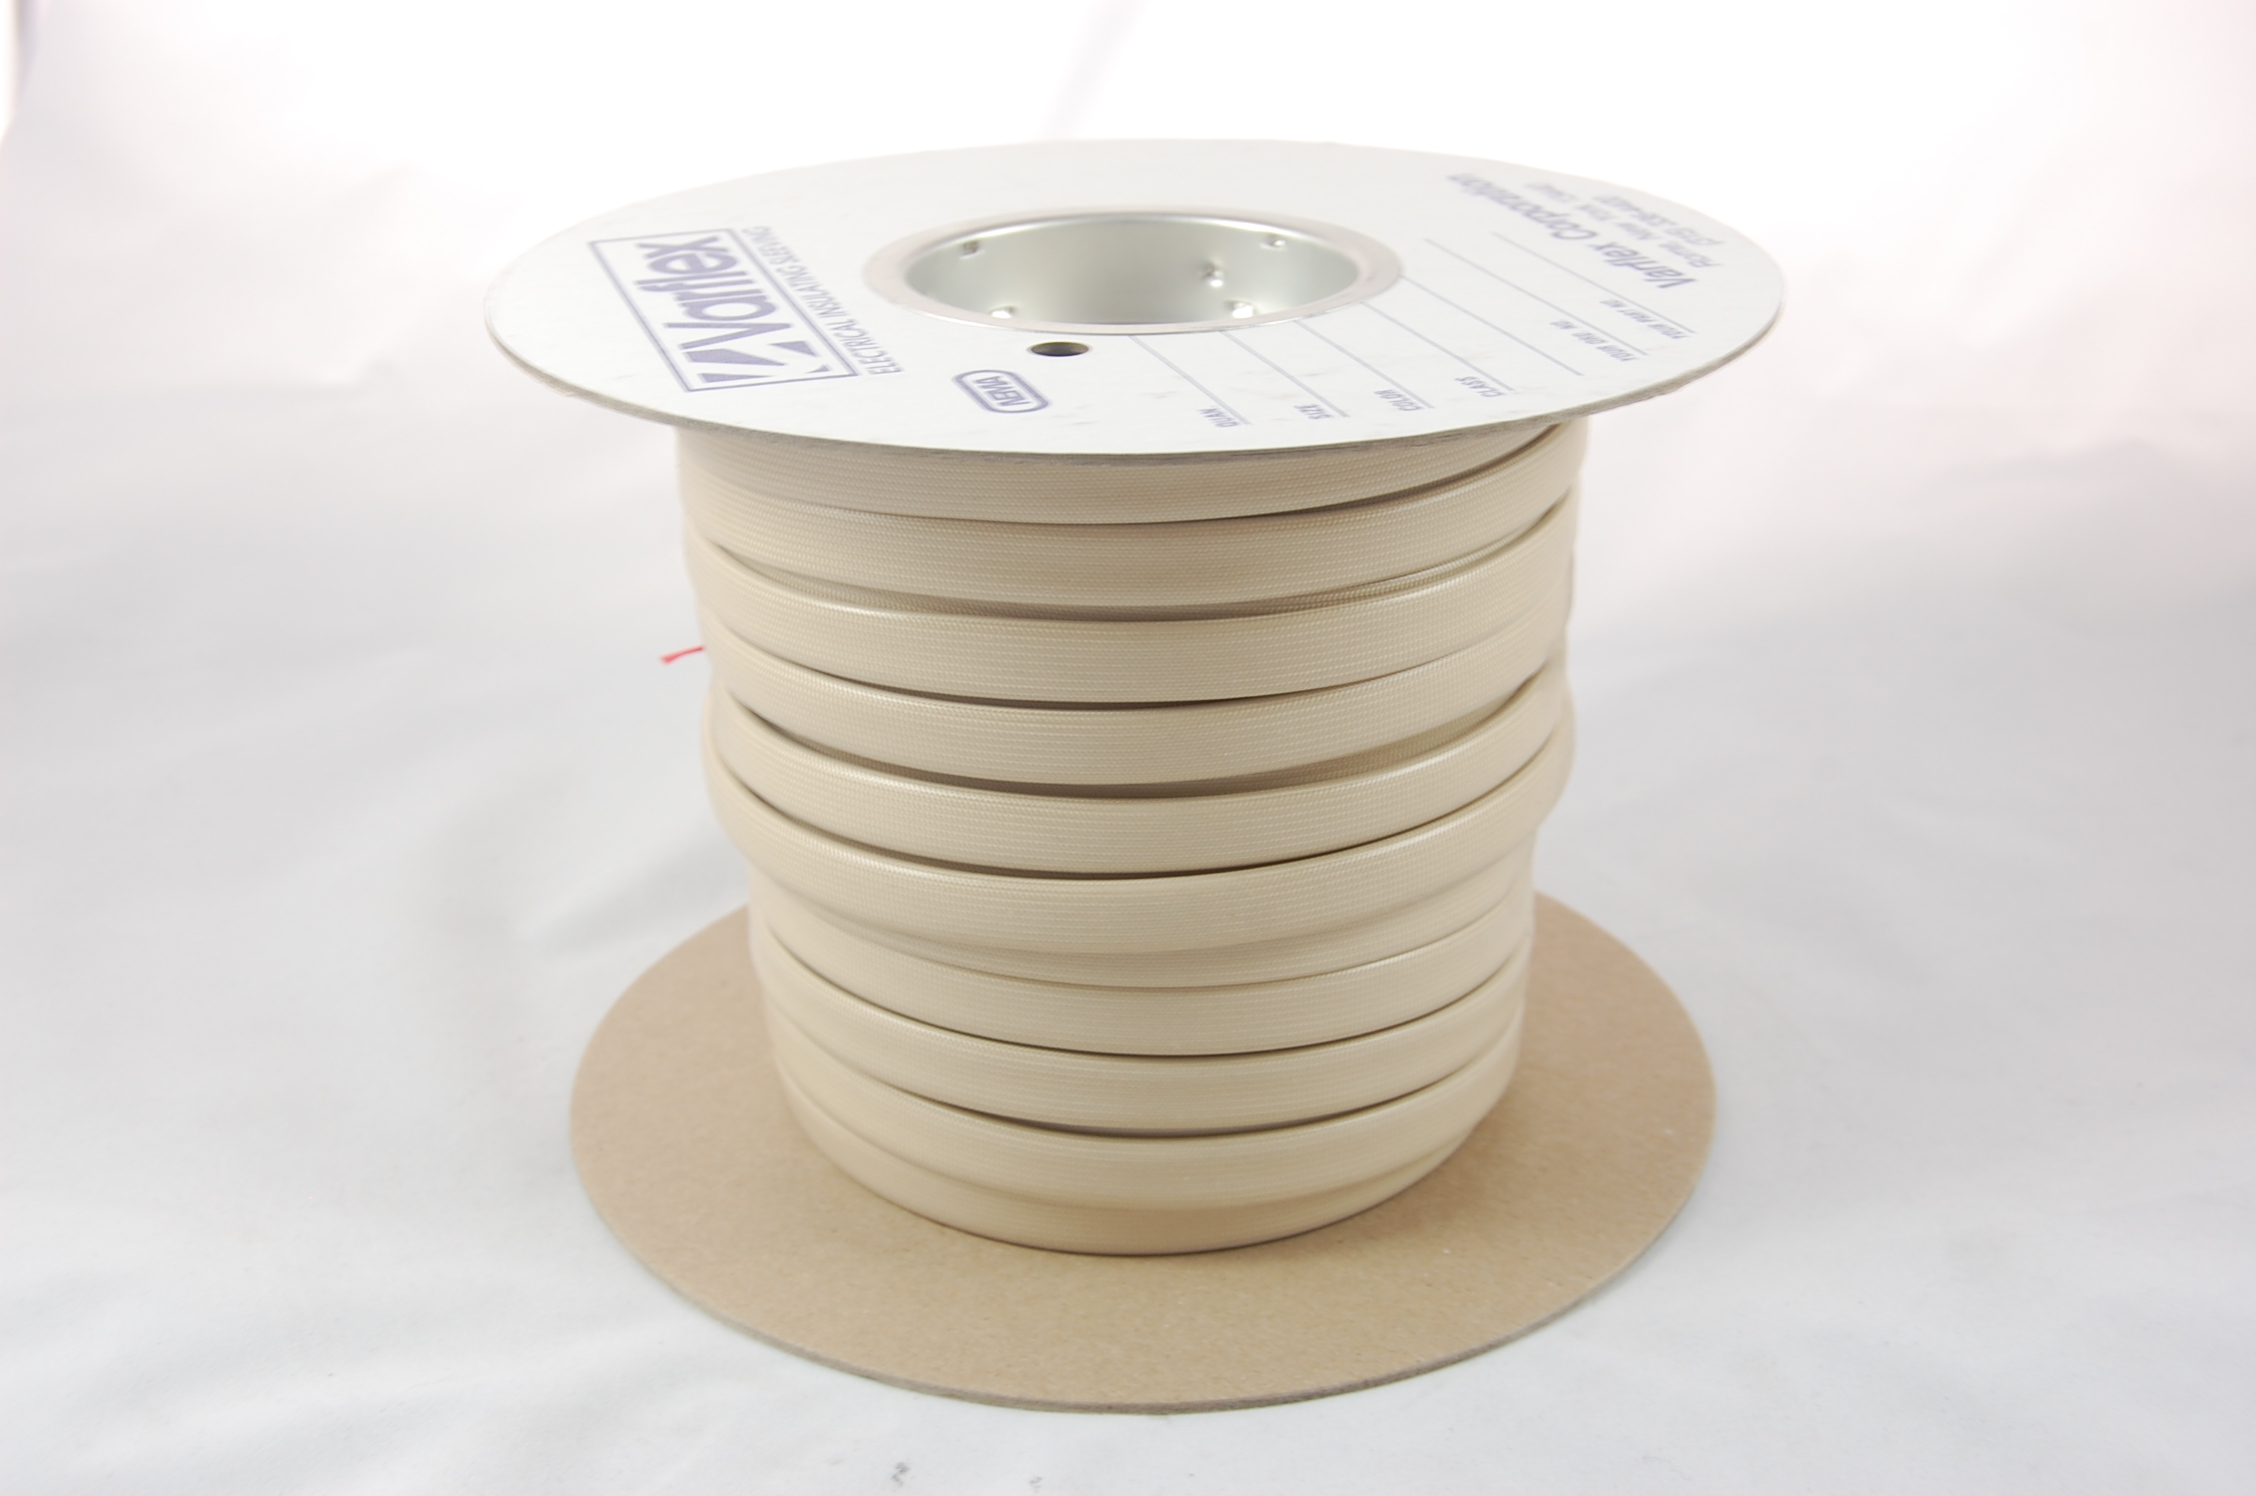 #3 AWG Varglas Silicone Rubber Grade H-A-1 (8000V) High Temperature Silicone Rubber Coated Braided Fiberglass Sleeving 200°C, natural, 150 FT per spool